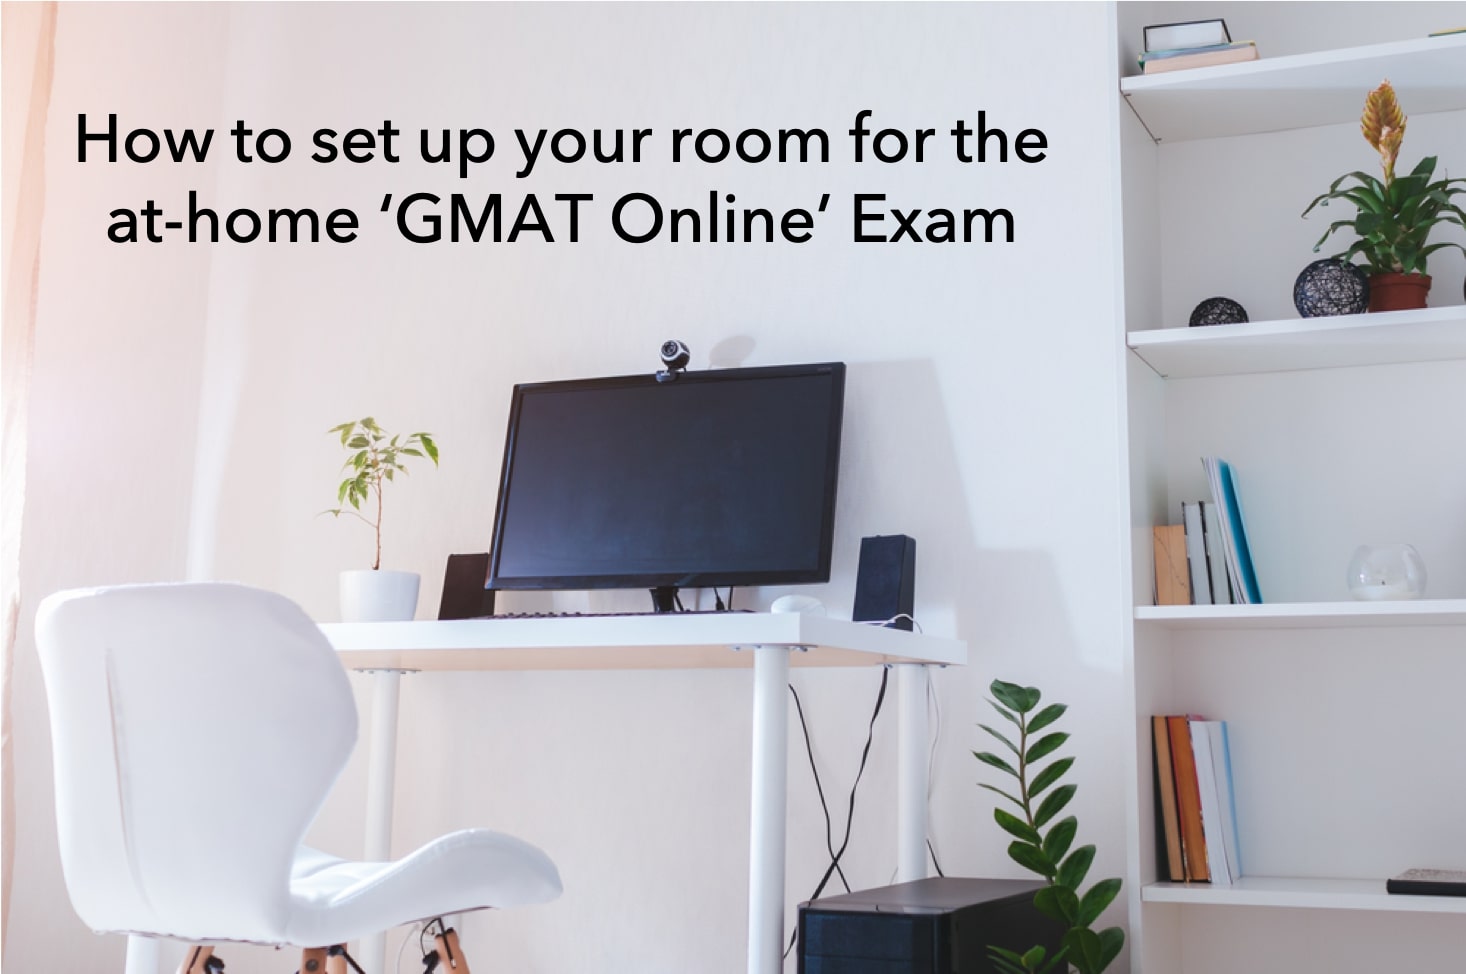 Tips and Checklist – Setting up your room for GMAT Online exam